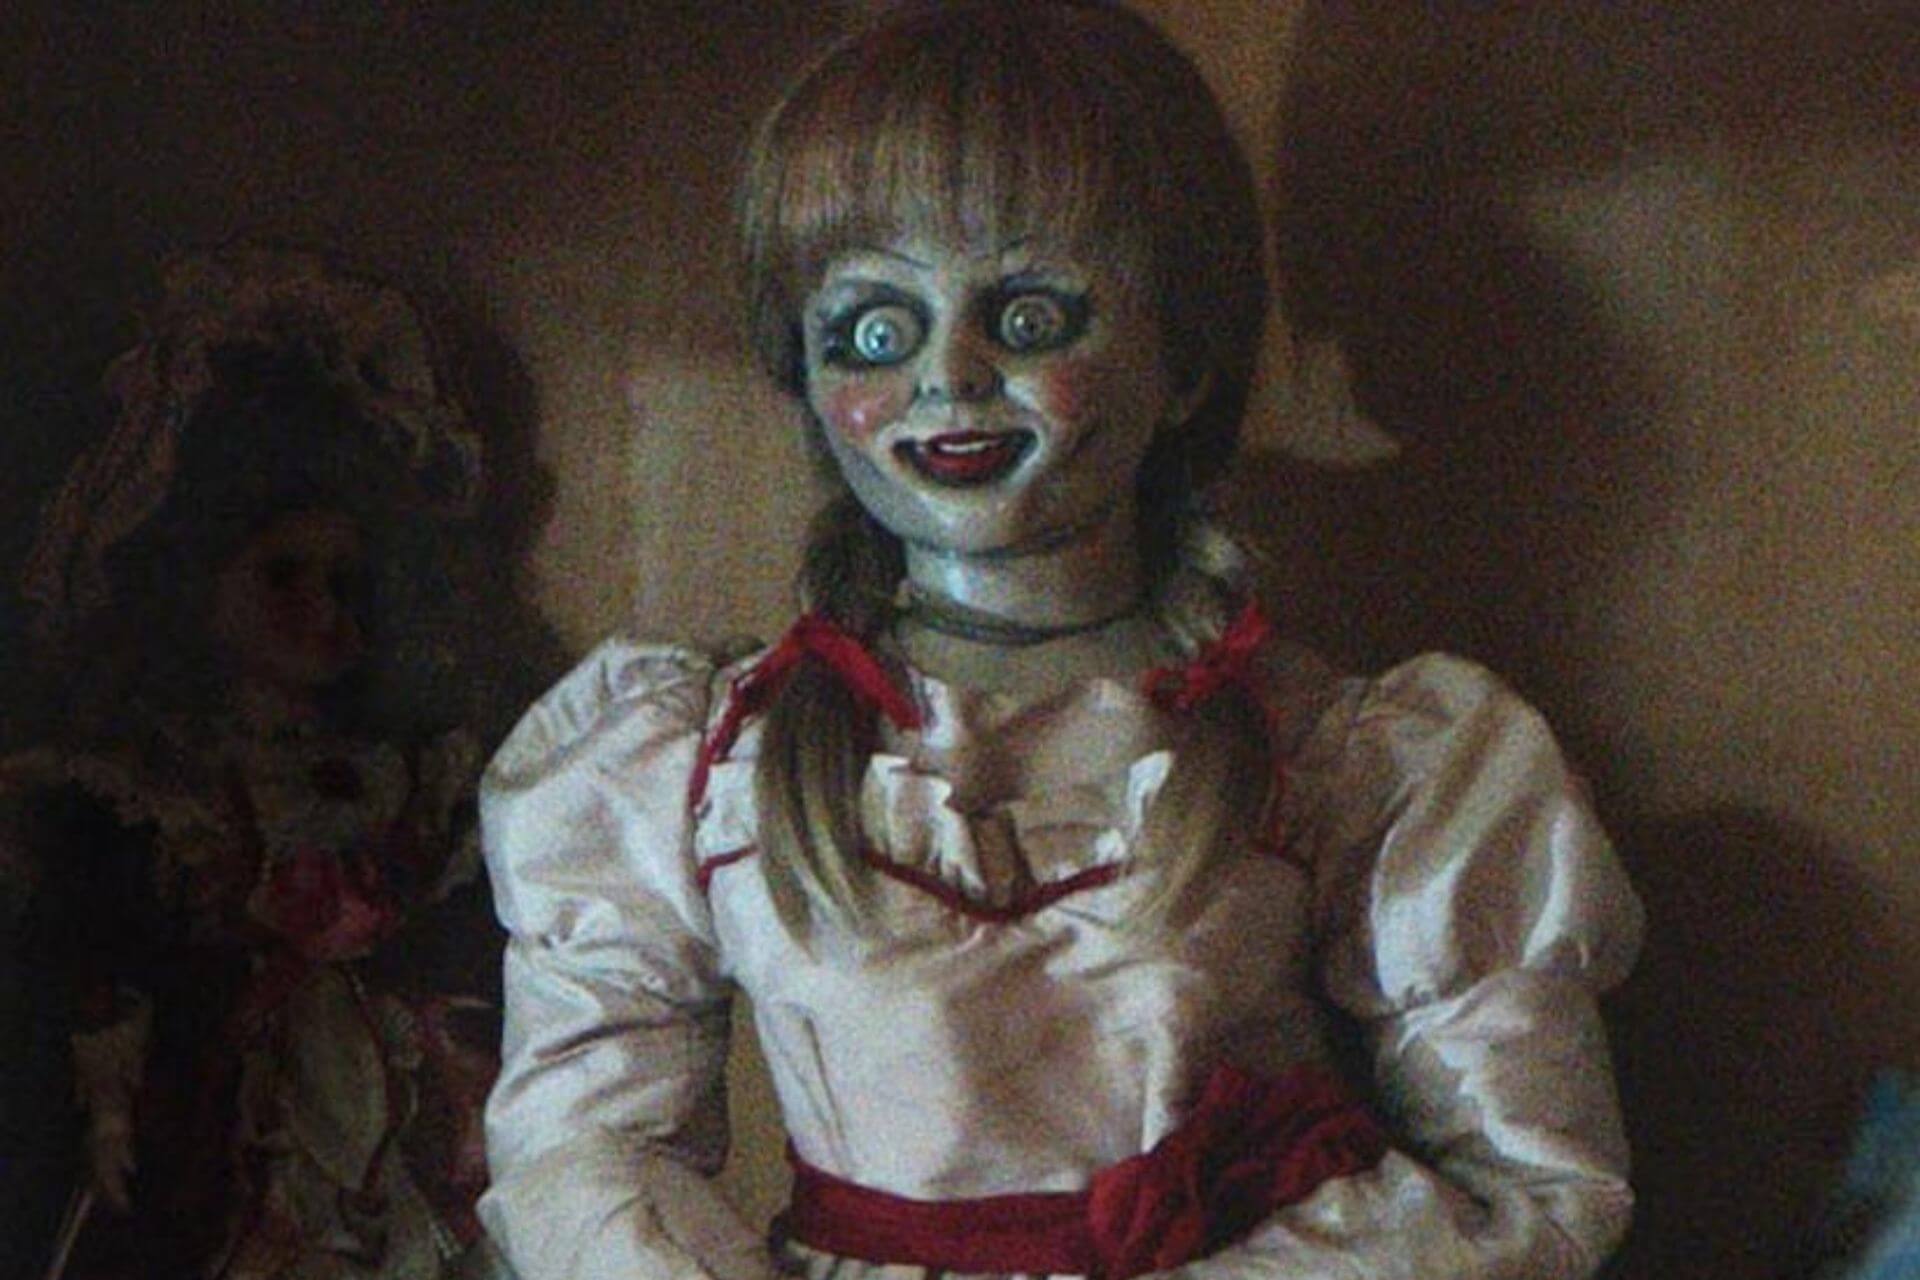 The Warrens say real life 'Annabelle' doll did not escape from museum